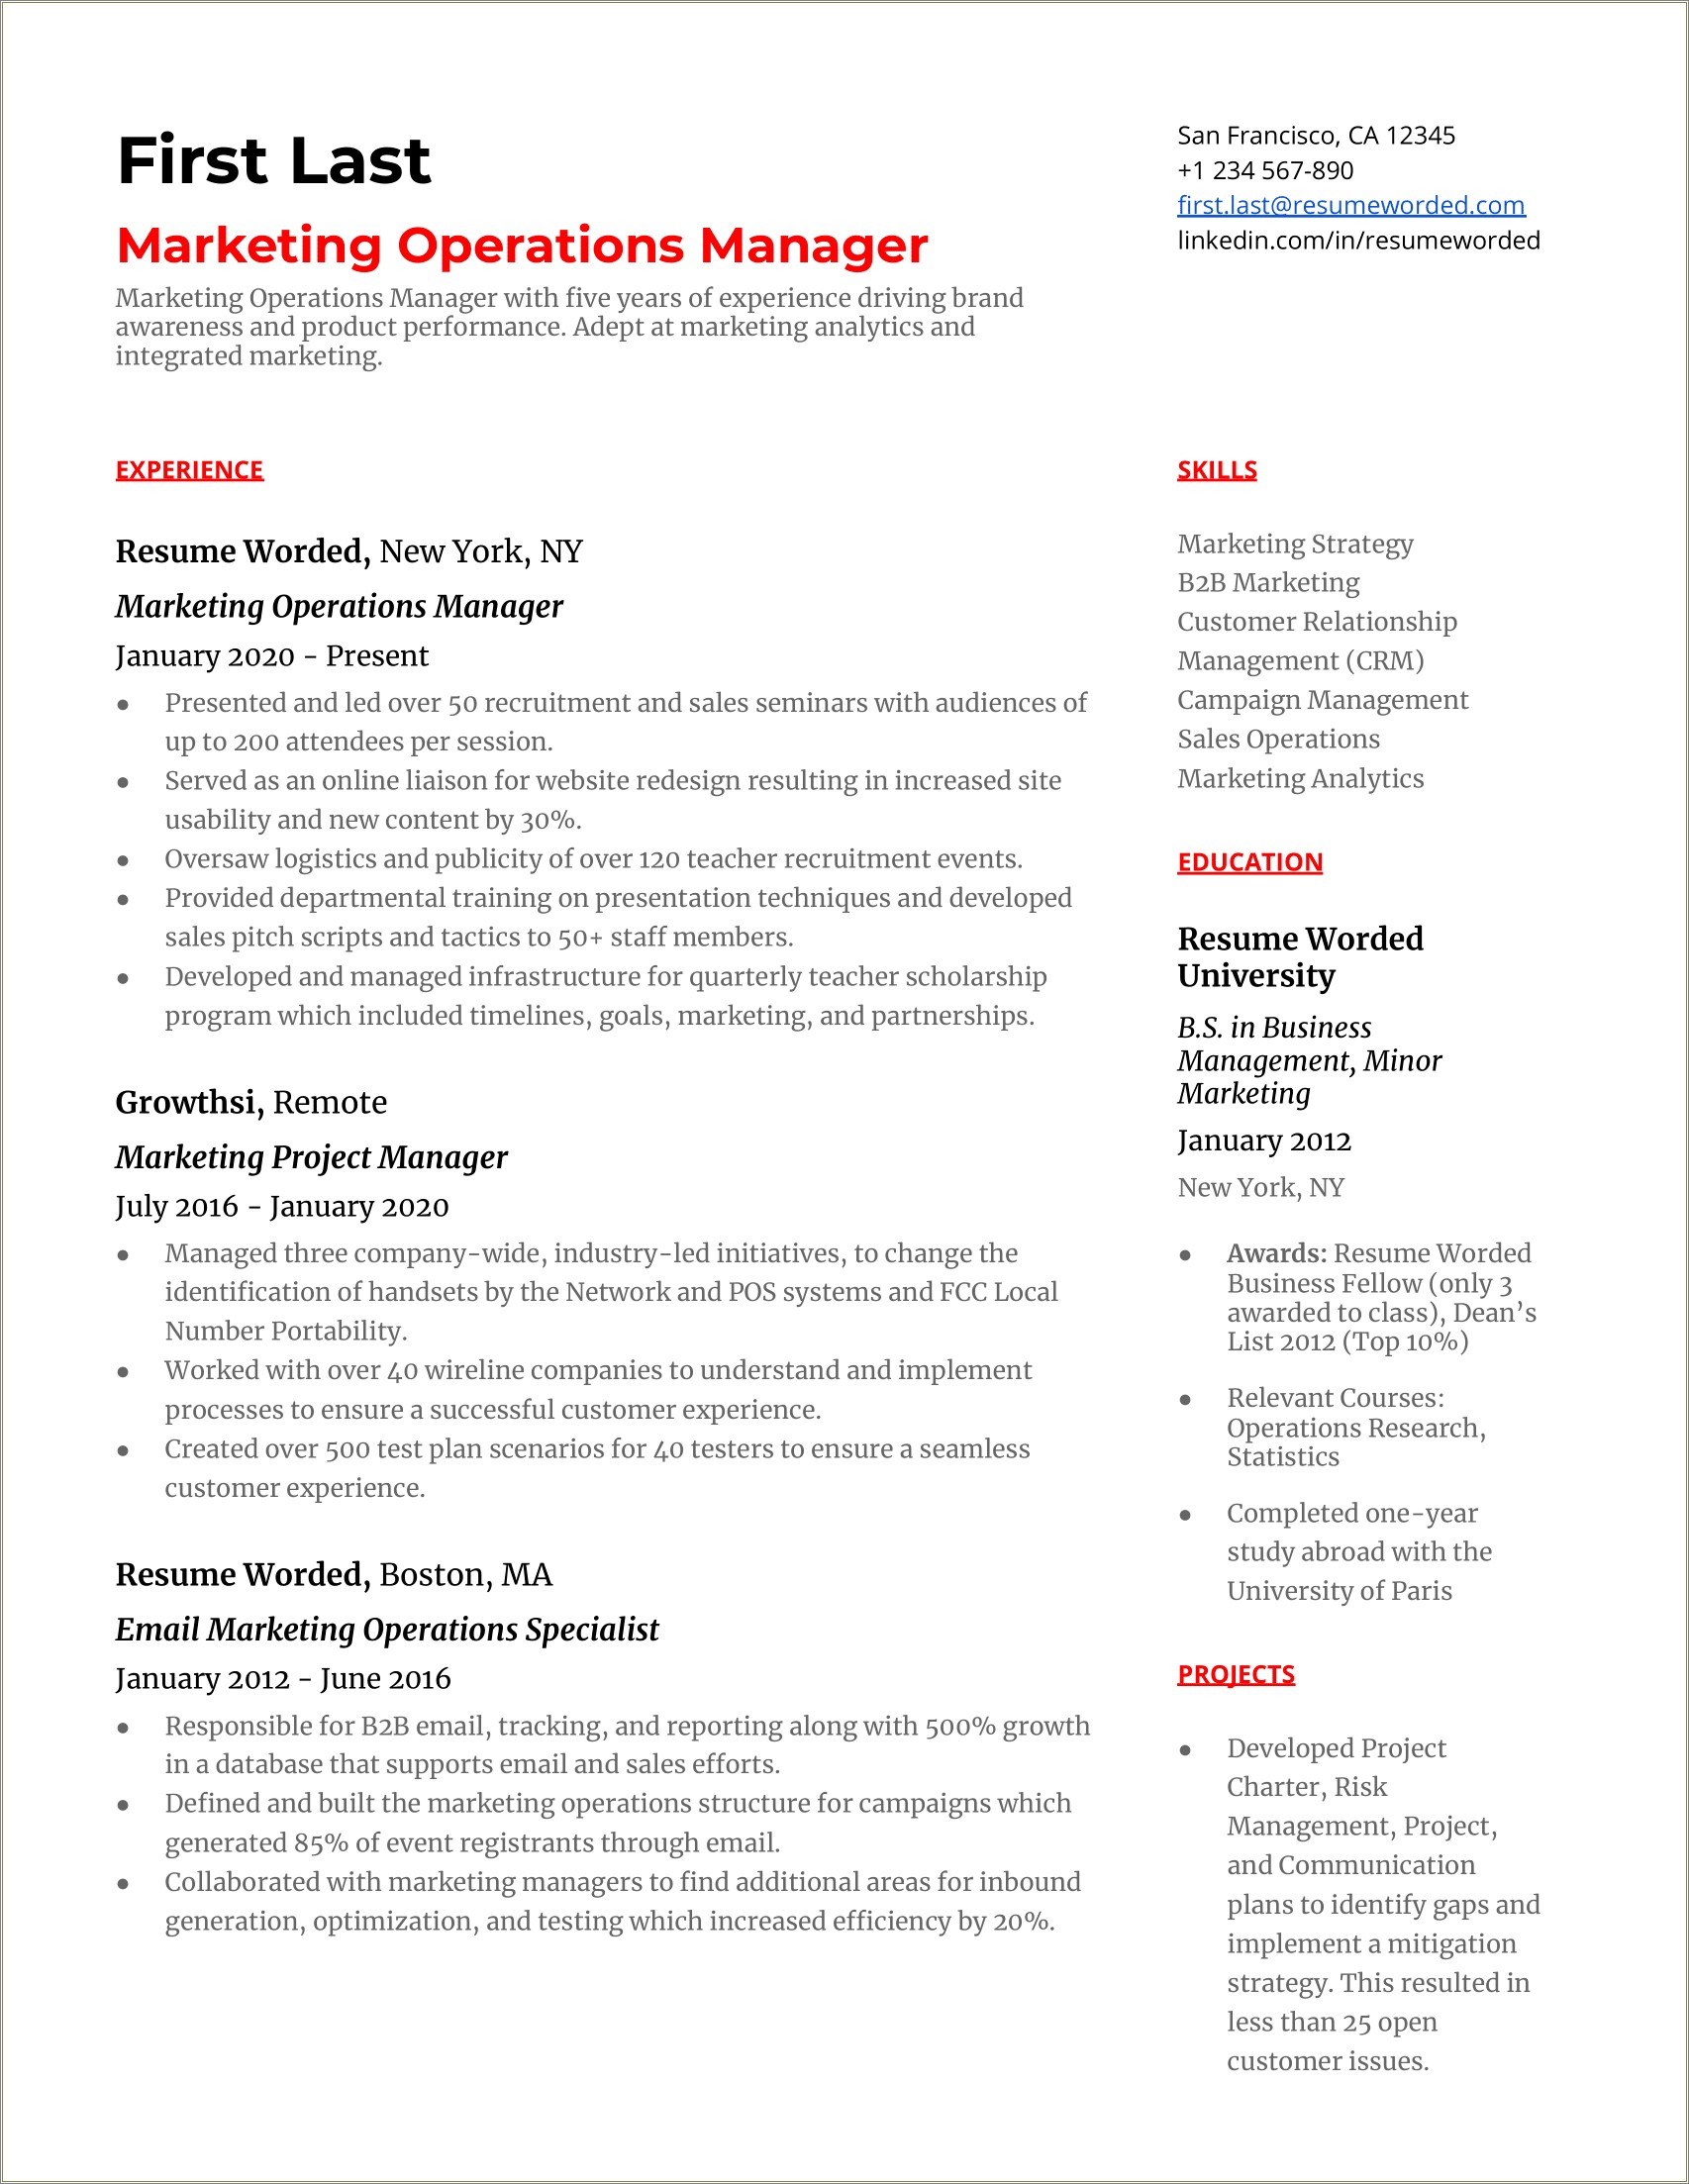 Sample Credit Risk Management Resume - Resume Example Gallery